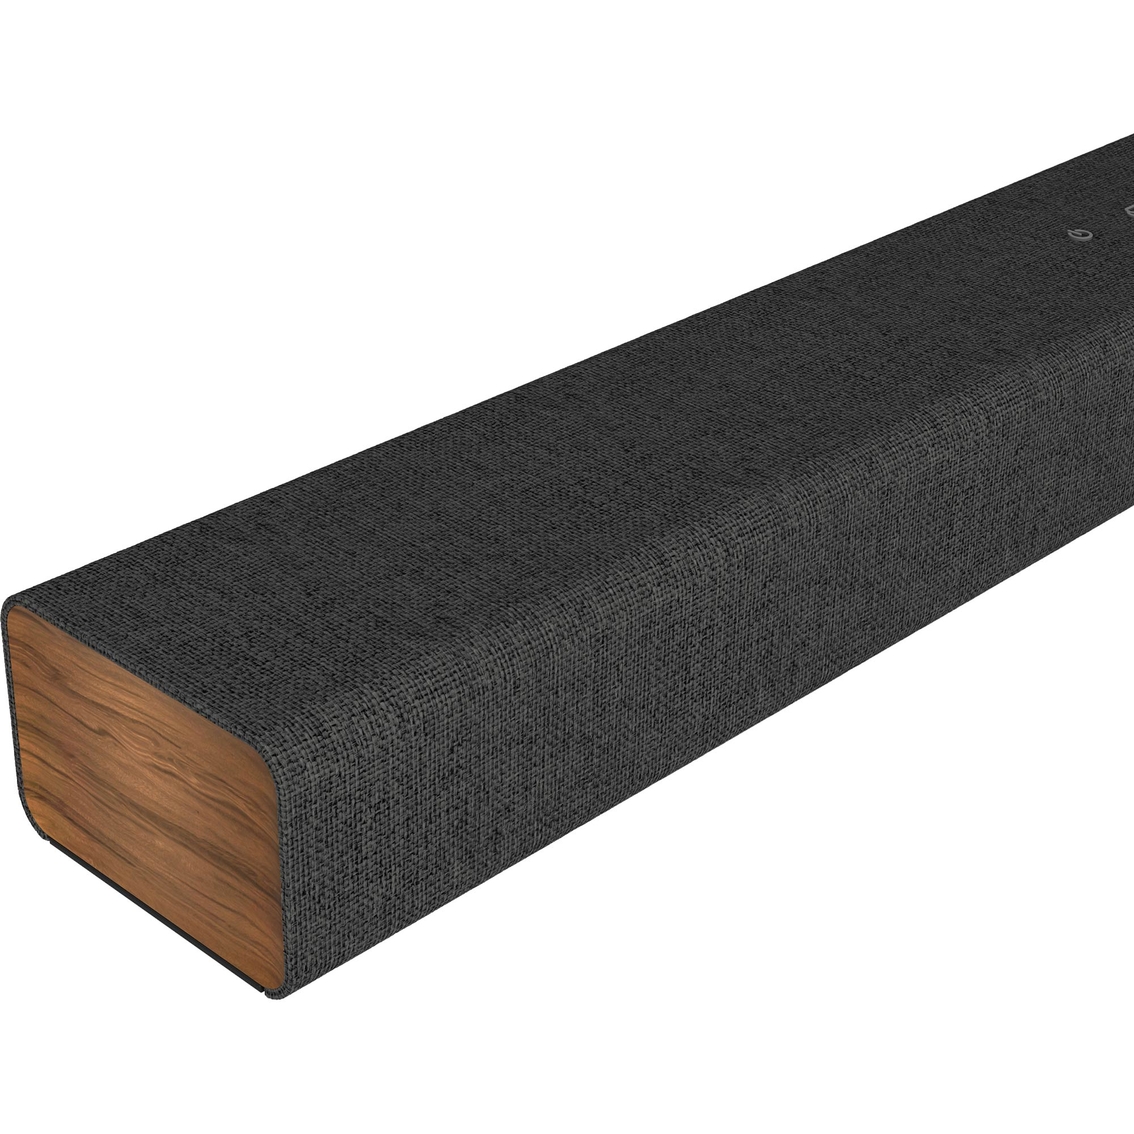 LG SP2 2.1 Channel 100W Sound Bar with Bluetooth and Built-In Subwoofer - Image 7 of 8